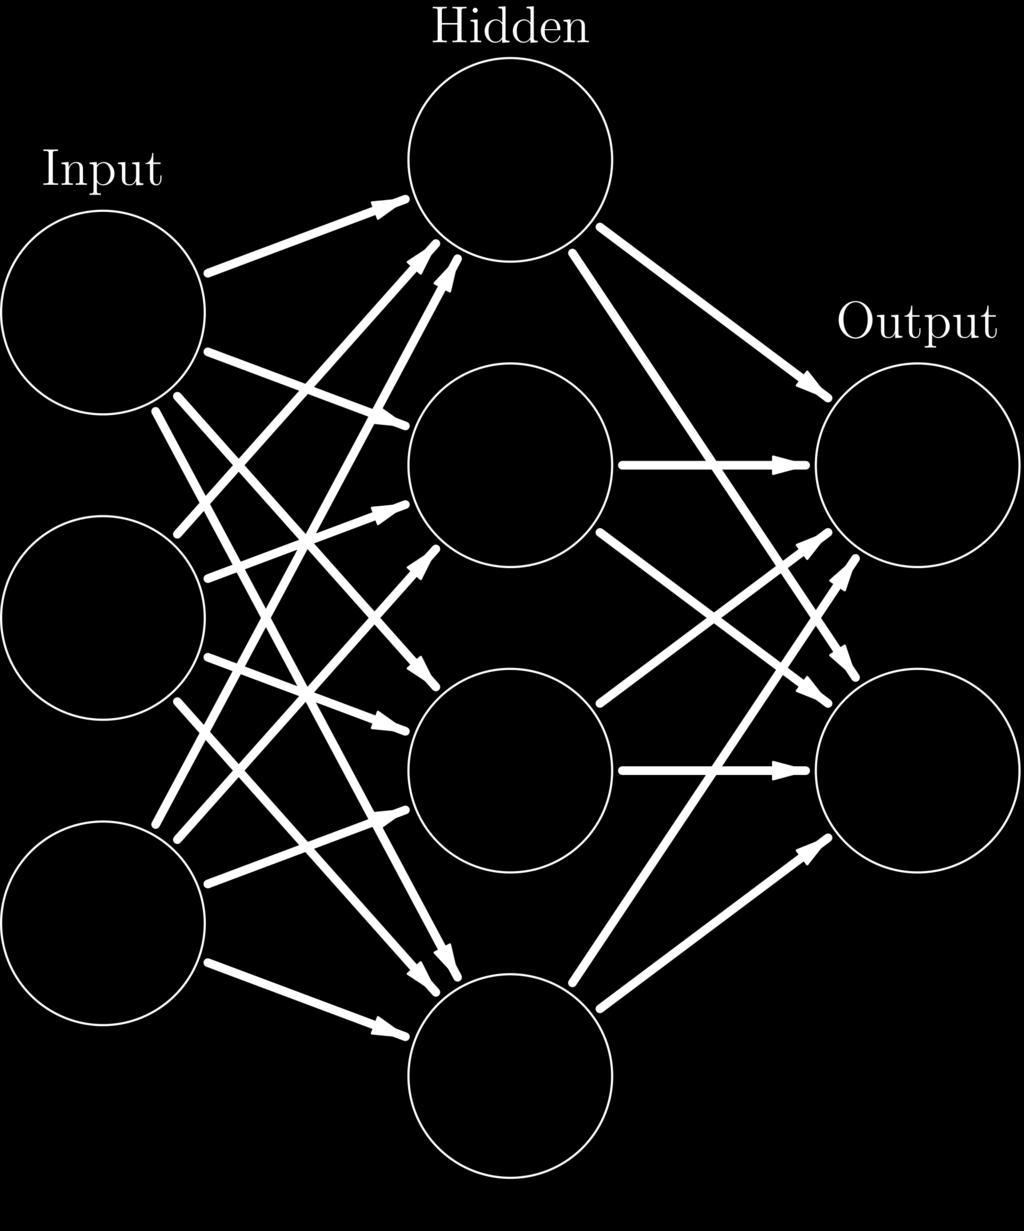 , MIPS) neural network structure and weights GPU instruction set systolic array and